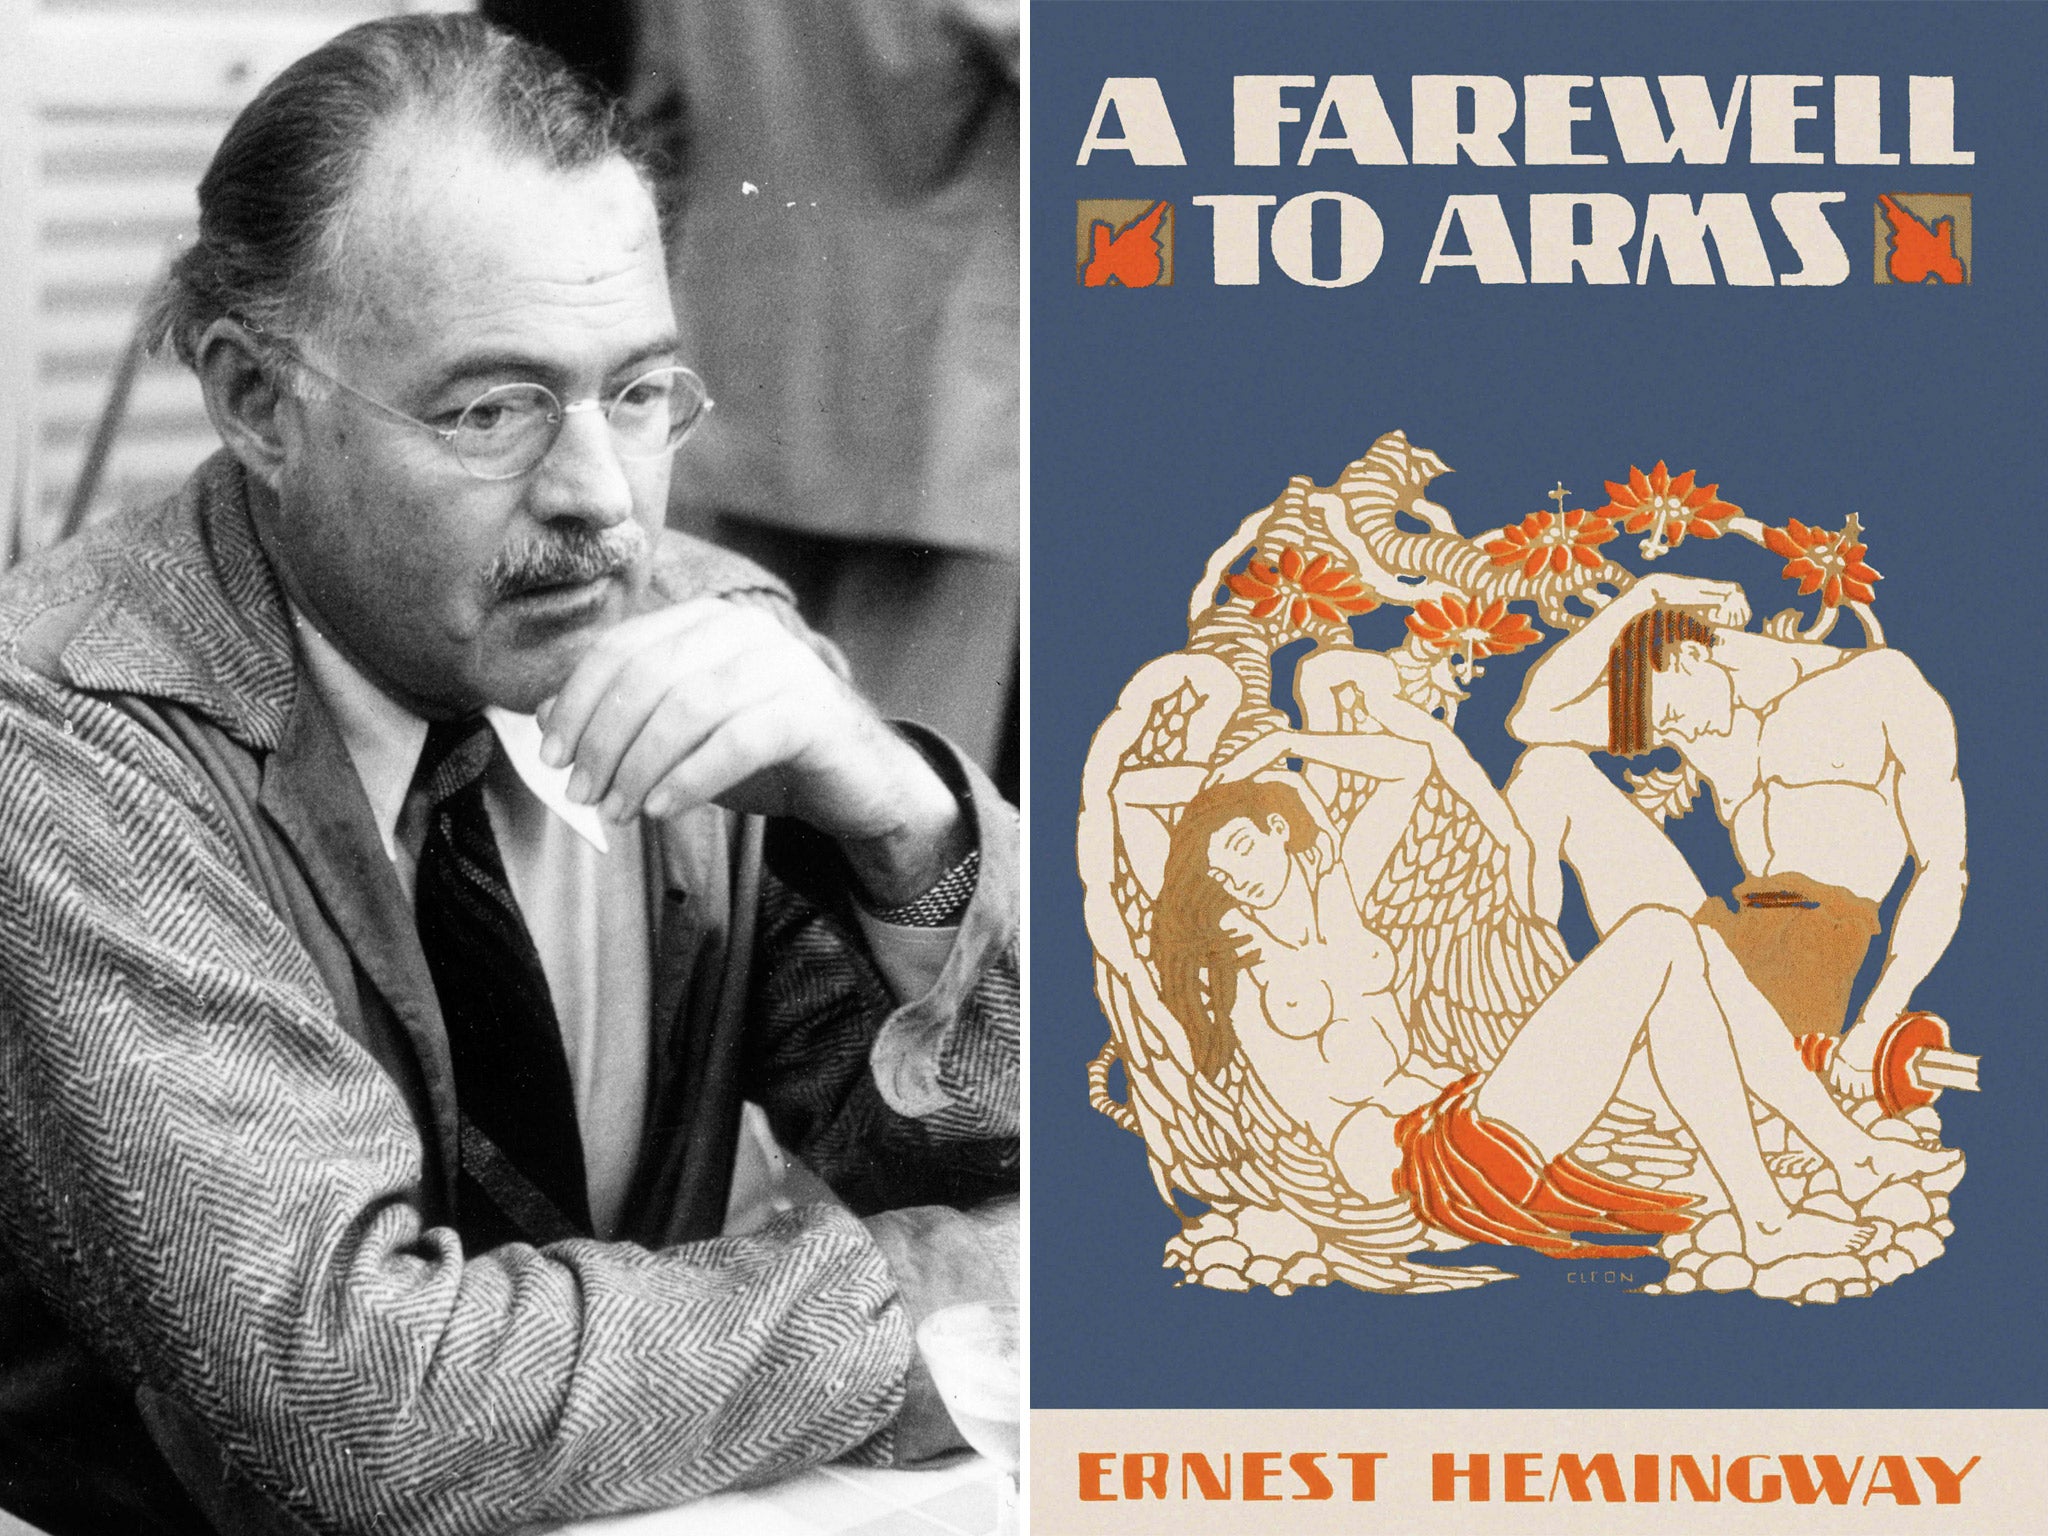 Ernest Hemmingway in 1955; The cover of 'A Farewell to Arms'